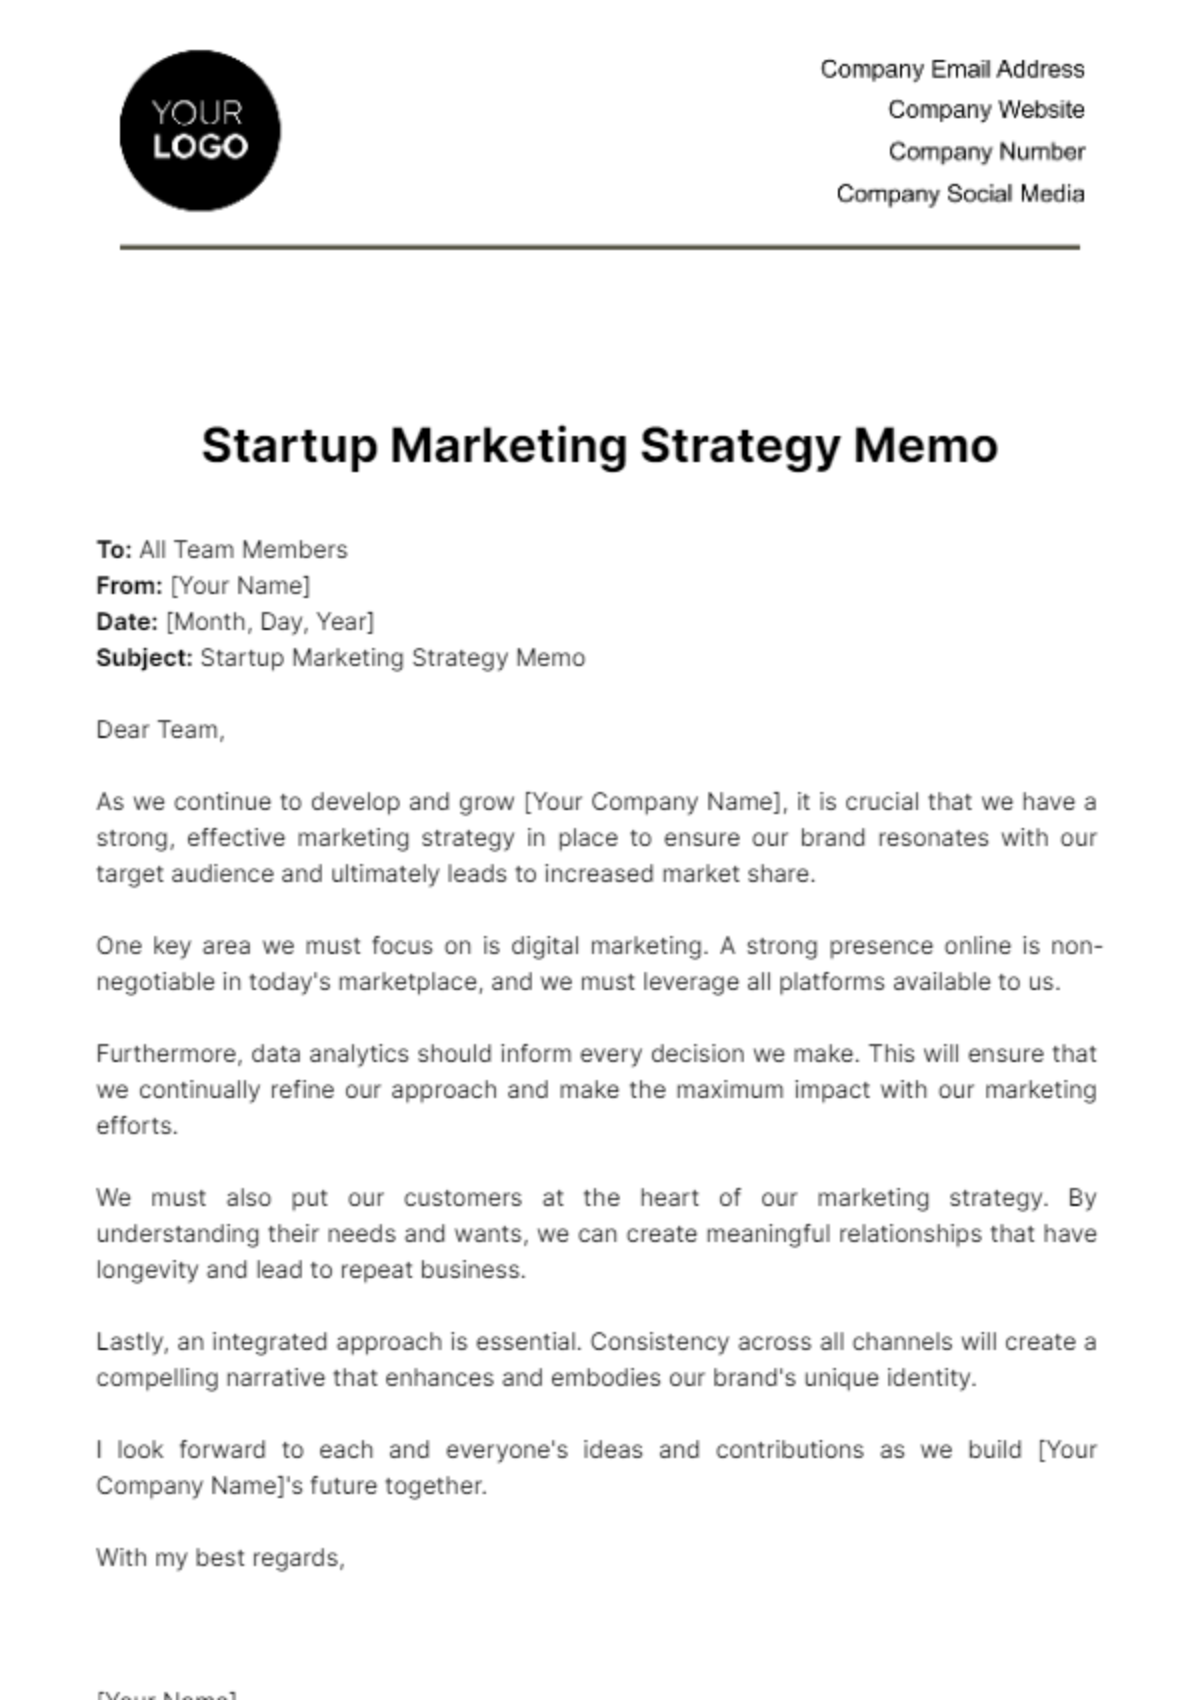 Free Startup Marketing Strategy Memo Template